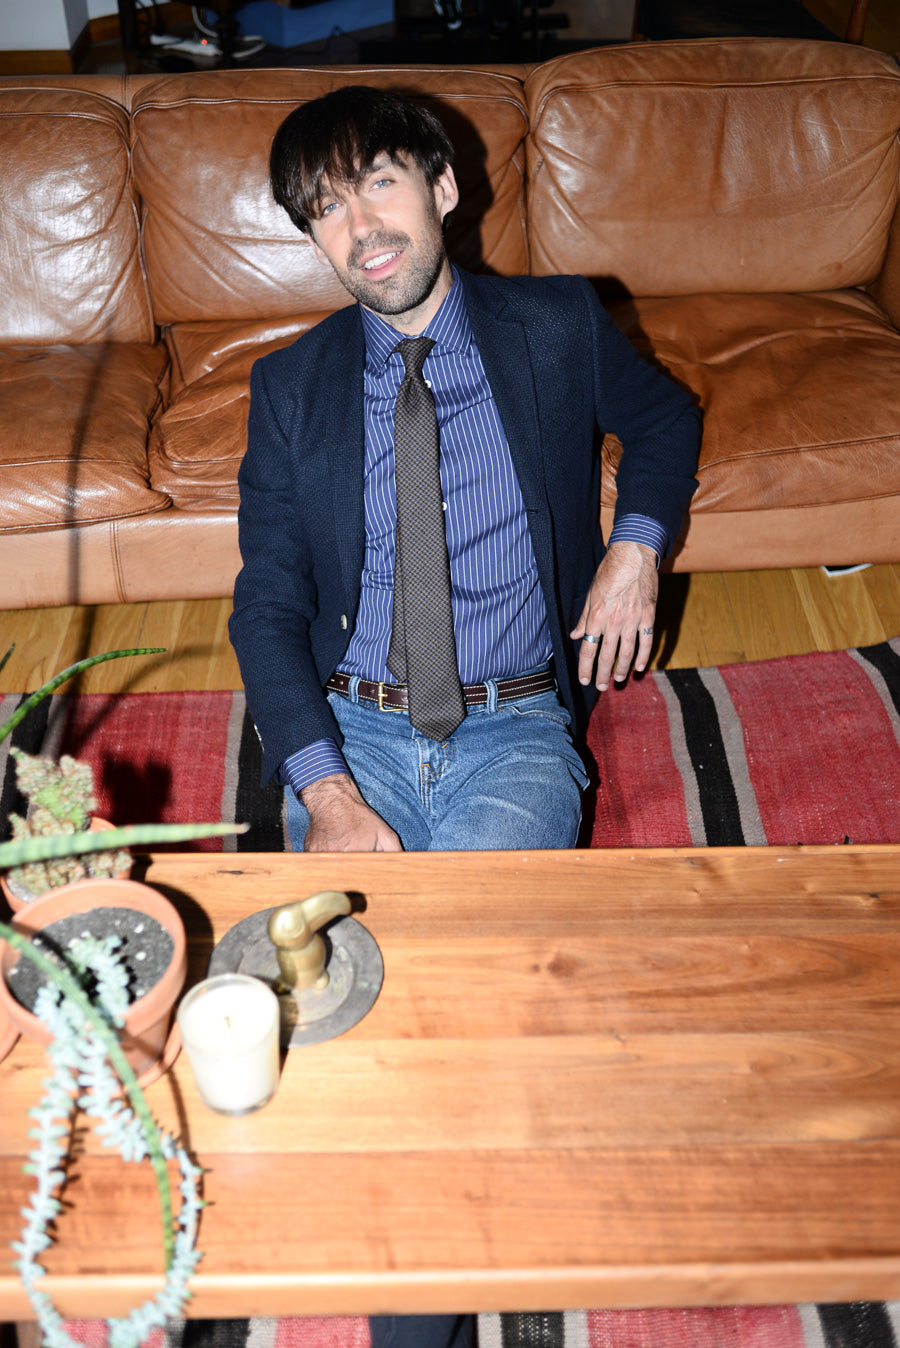 Dylan shot wearing jeans, a blue and white striped dress shirt, and a navy blazer sitting on the floor in front of a leather couch.